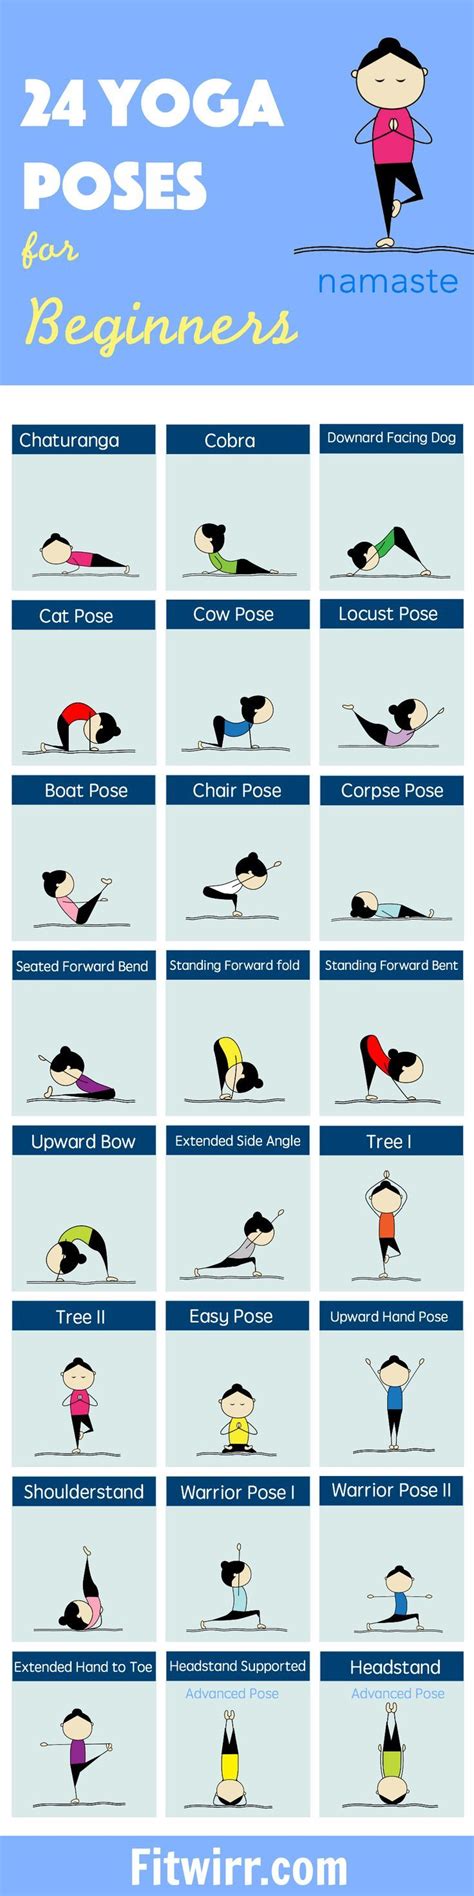 Best Images About Sun Salutation On Pinterest Yoga Poses